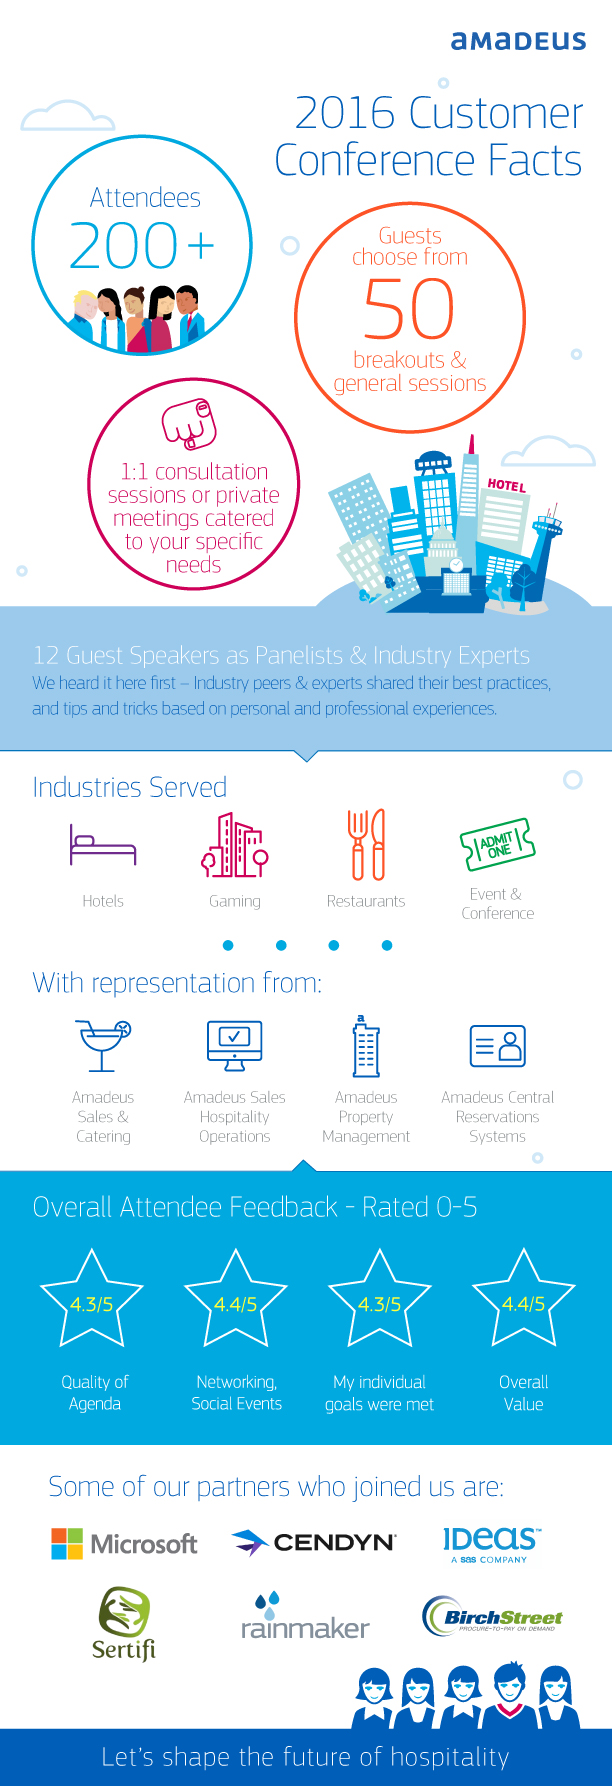 Amadeus Hospitality Customer Conference 2016 Facts Infographic